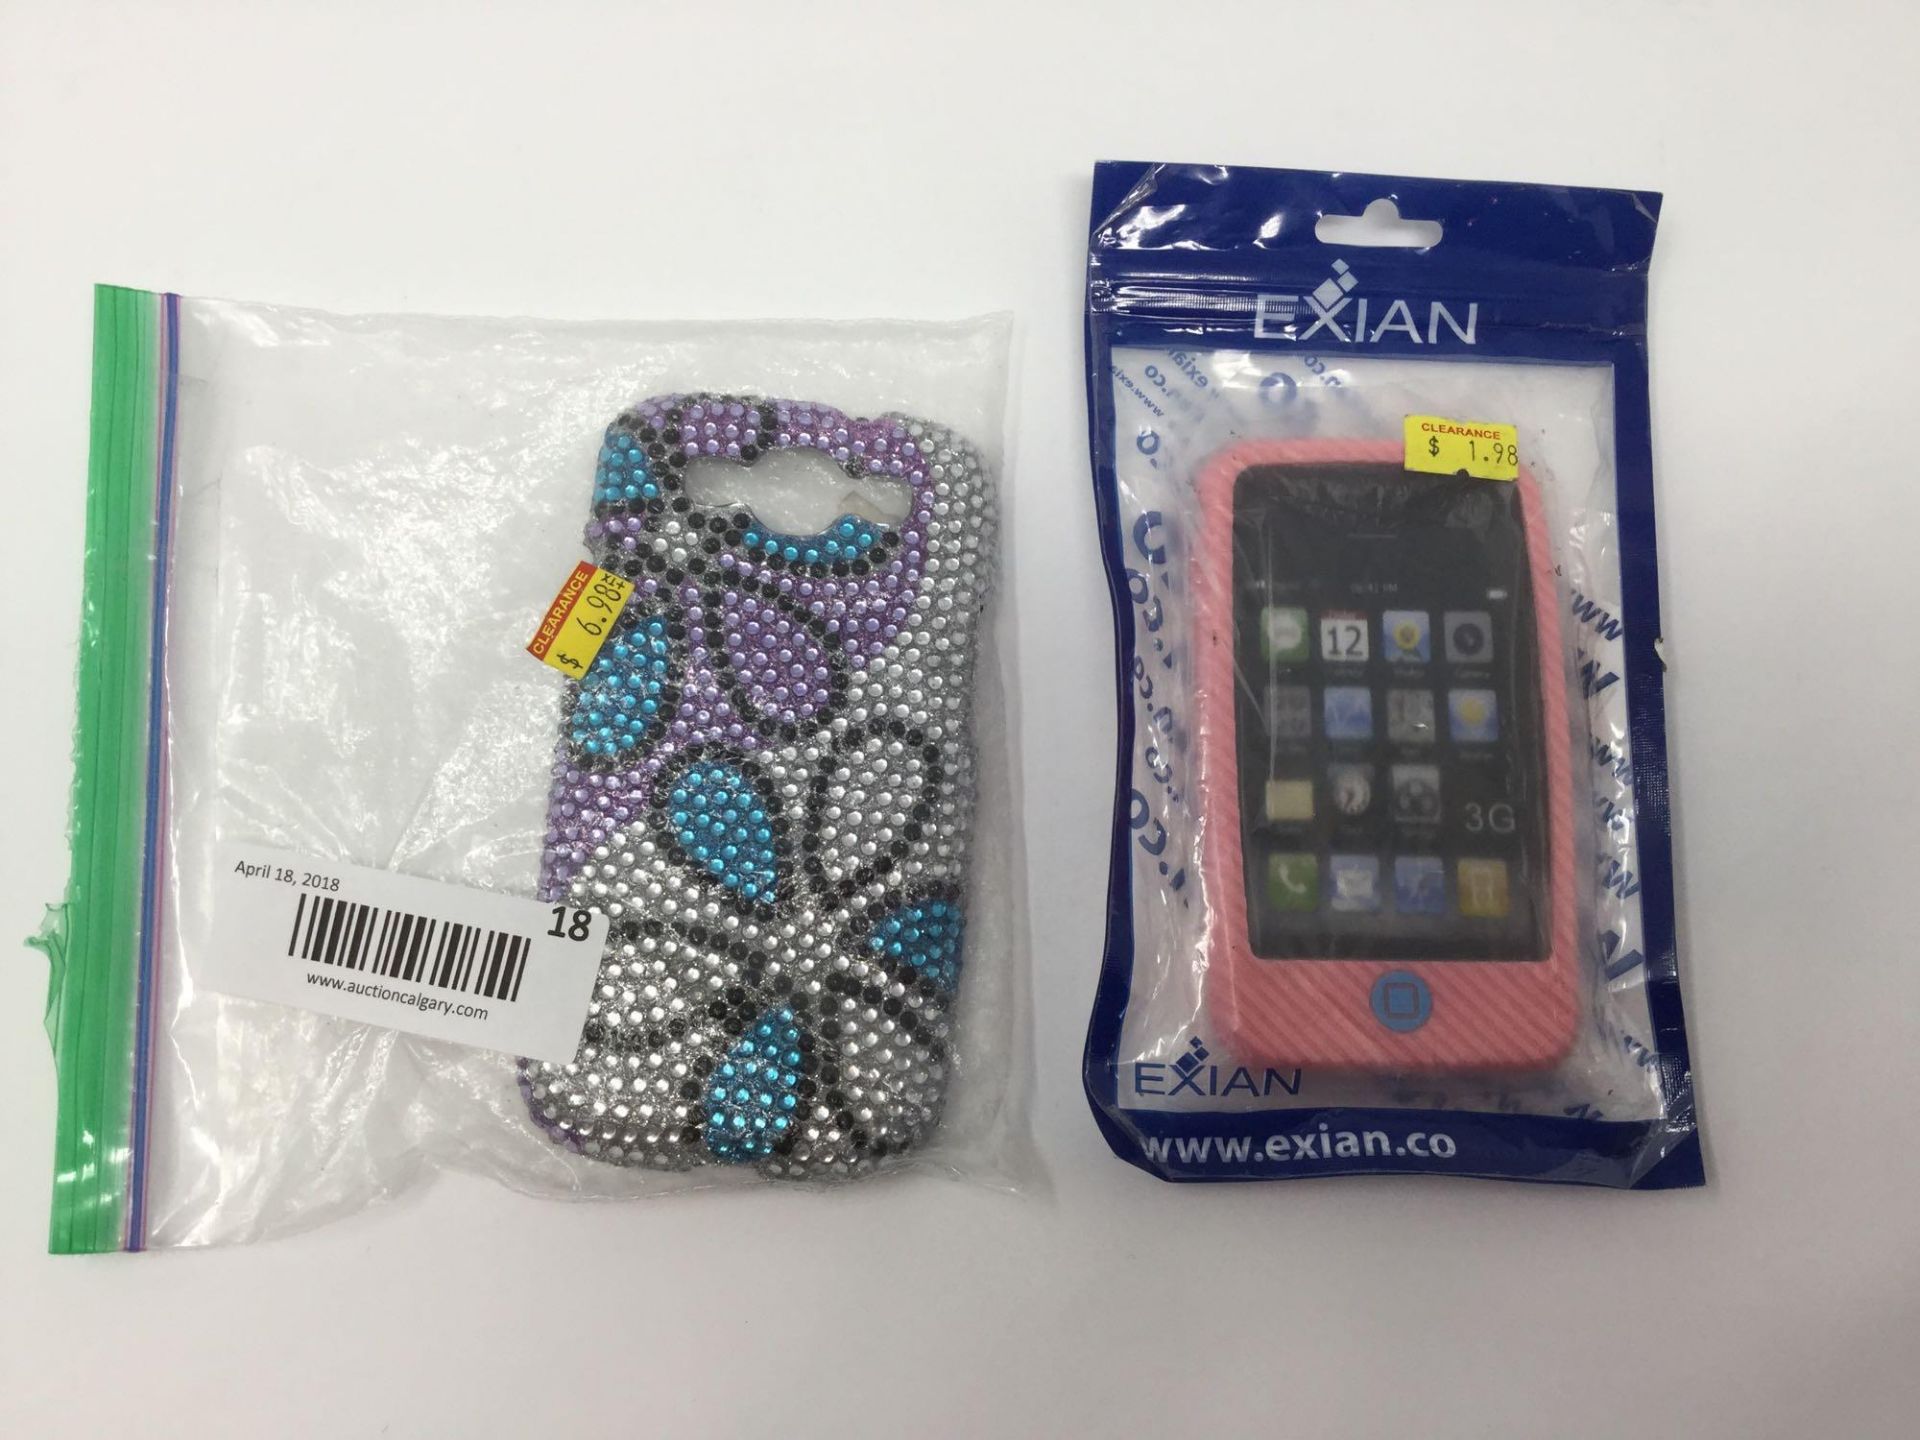 Pair of Exian iPhone 3G/3Gs Phone Cases